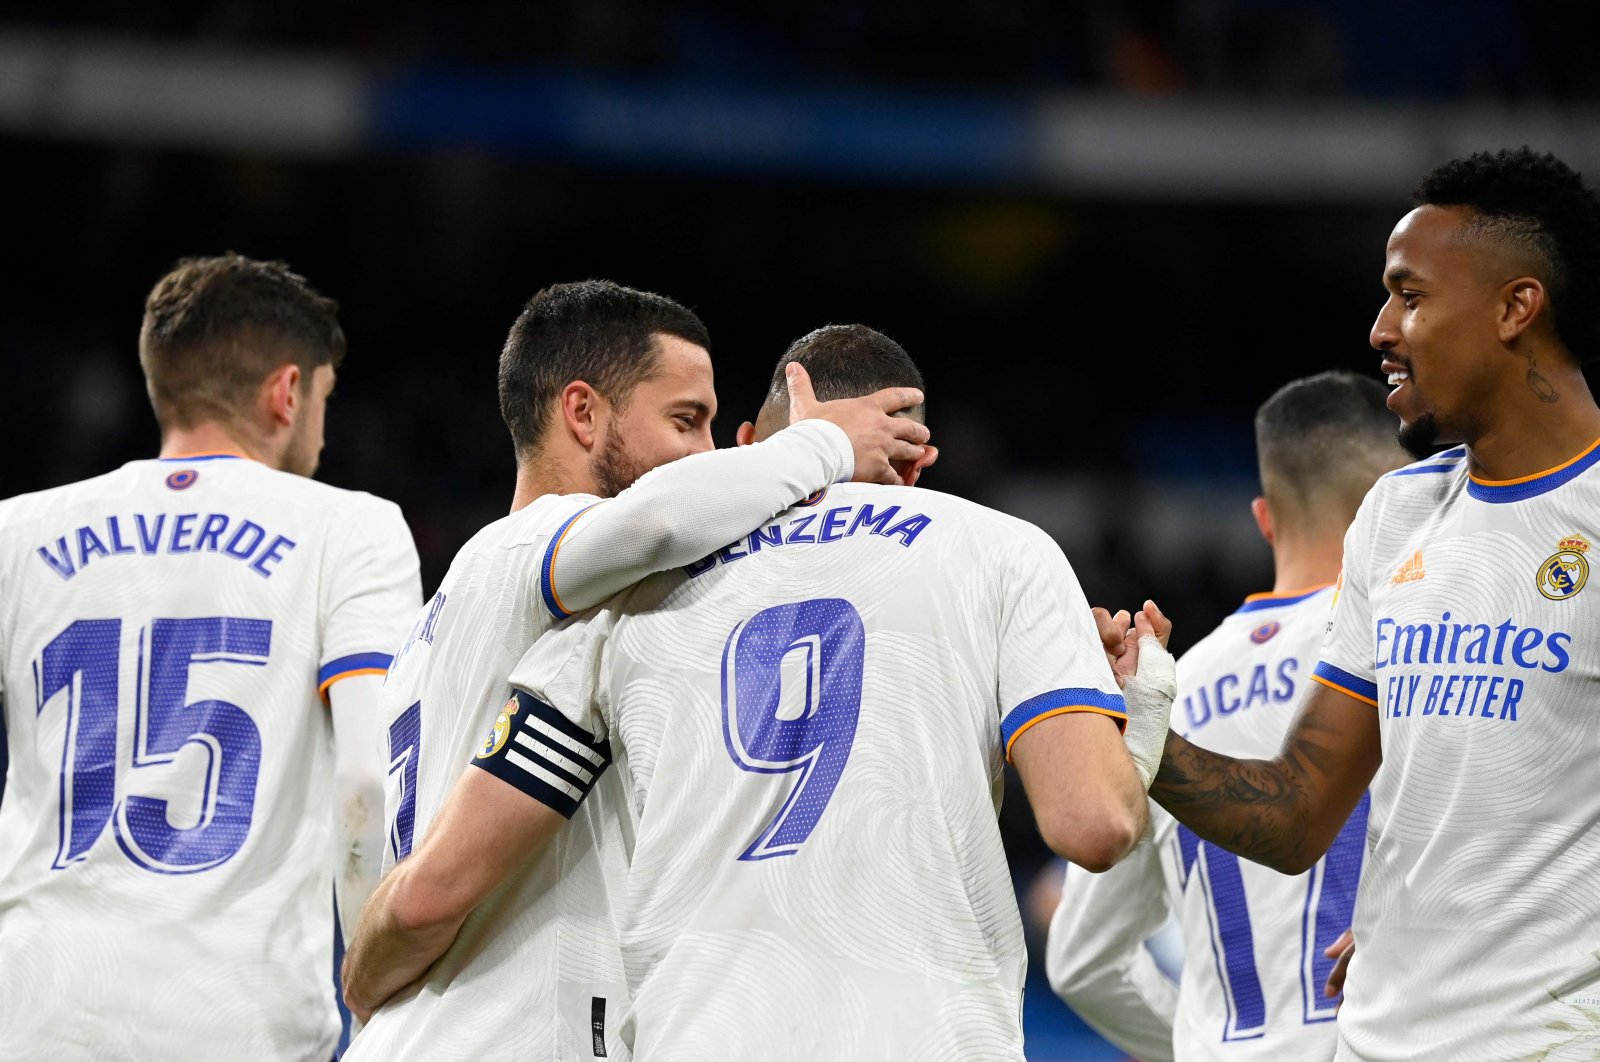 Real Madrid players celebrate a goal during a La Liga match against Deportivo Alaves at the Santiago Bernabeu stadium in Madrid, Spain, Feb. 19, 2022. (AFP Photo)